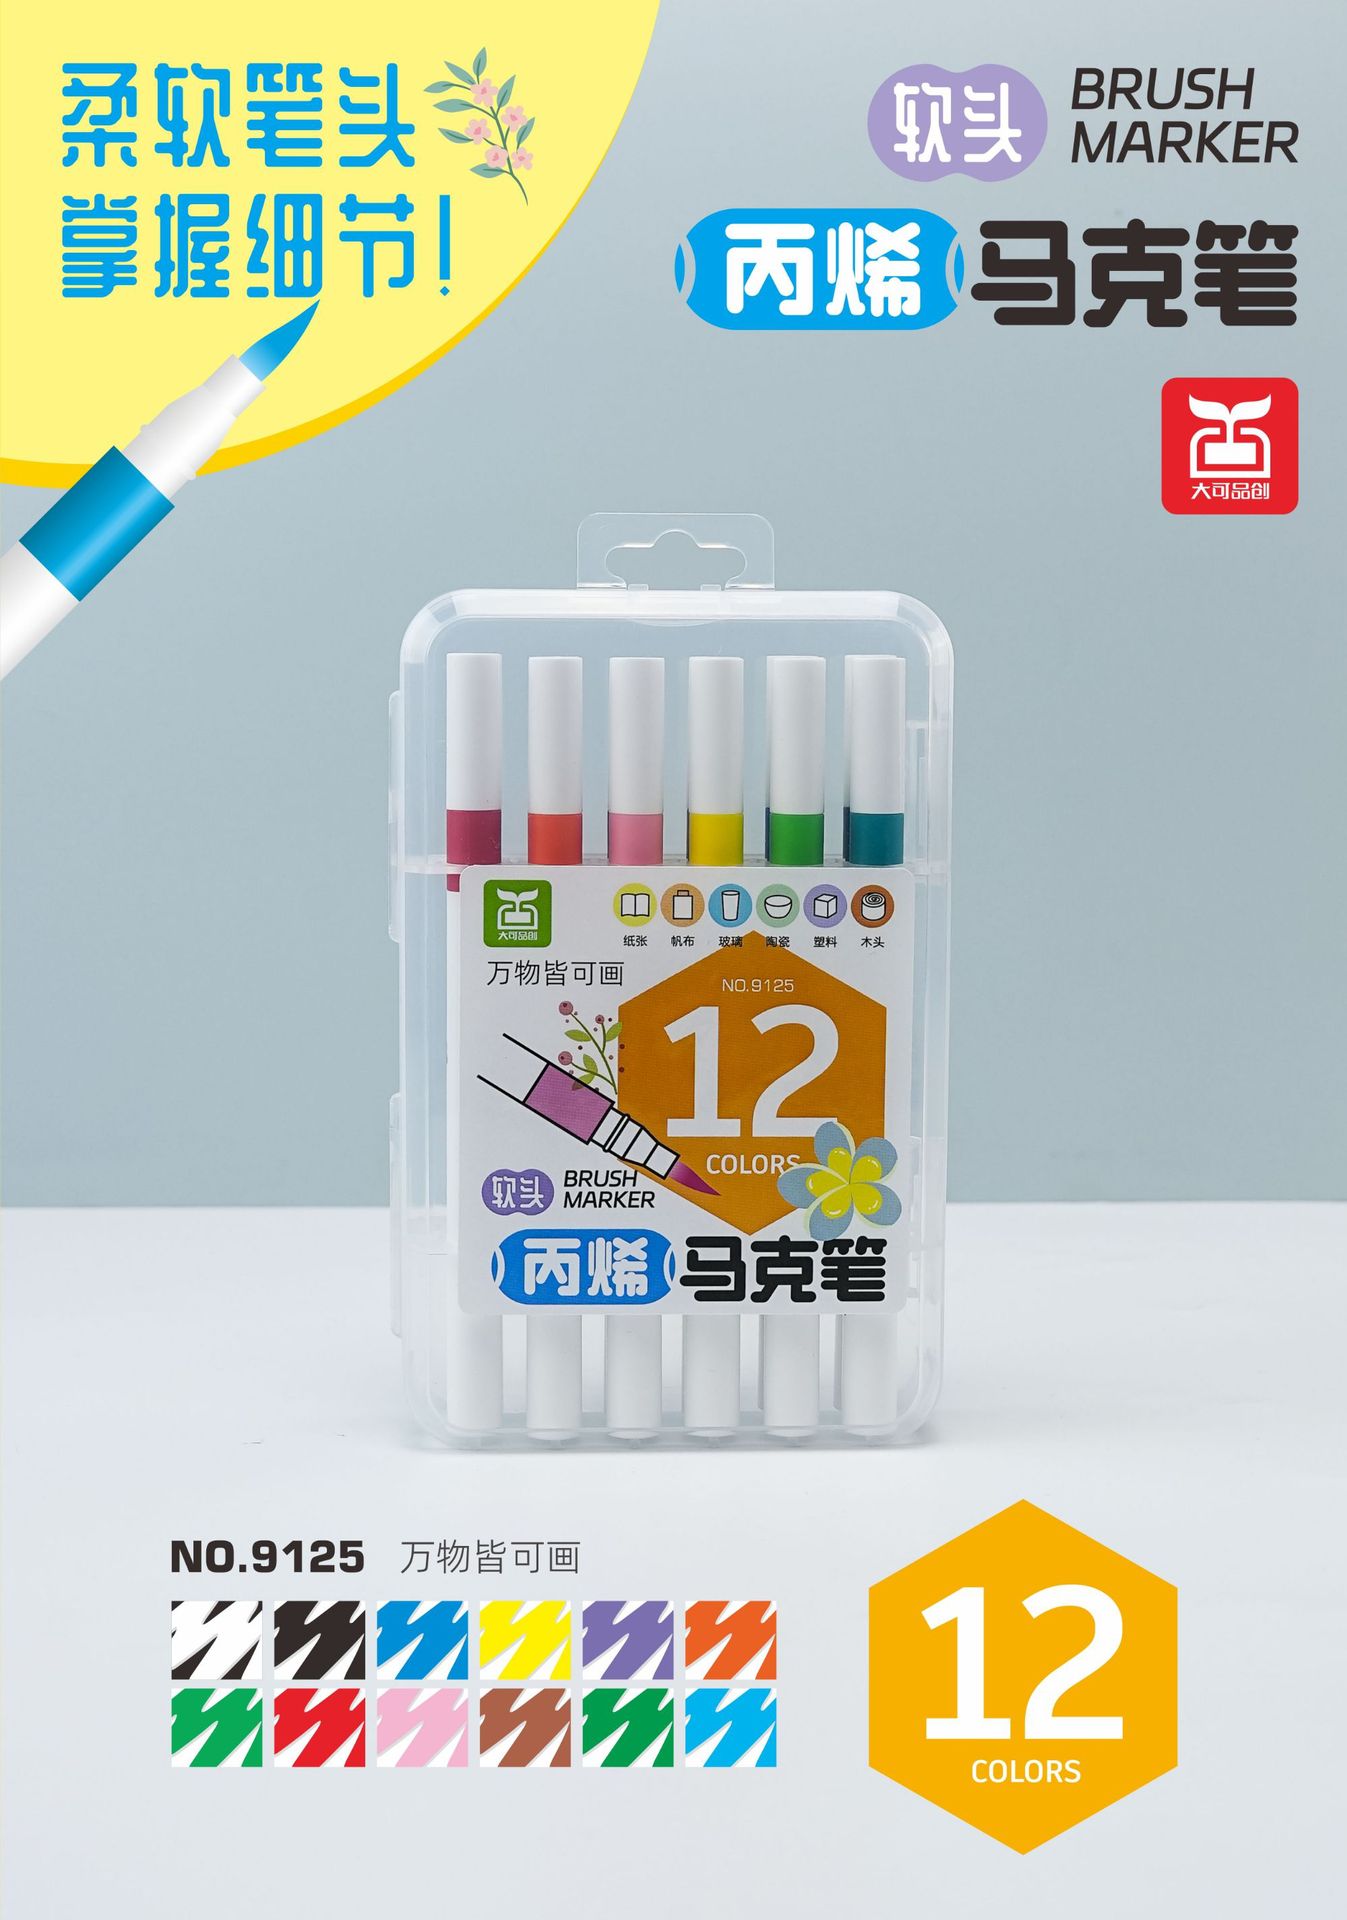 Soft Head Acrylic Marker Pen 60 Color Water-Based Graffiti Pen Only for Art Hand-Painted Pen DIY Children Waterproof and Opaque Color